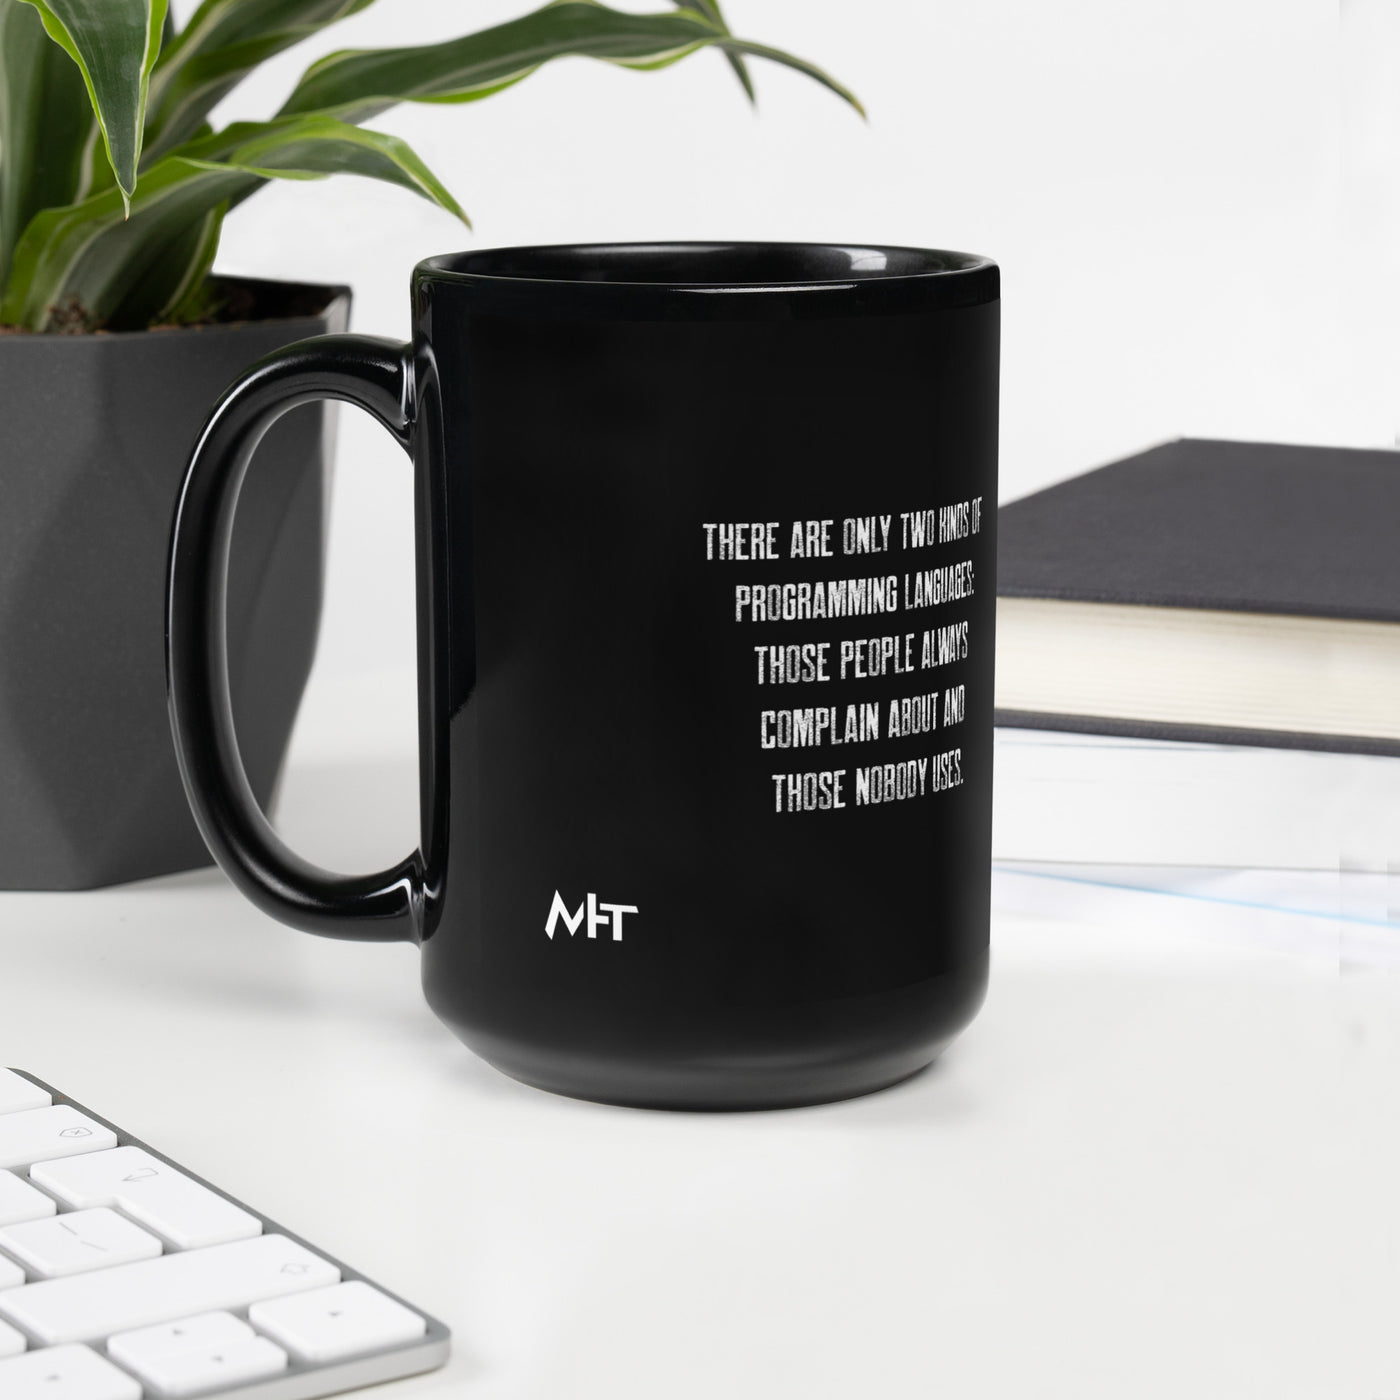 There are only two kinds of programming languages those people always complain about and those nobody uses V1 - Black Glossy Mug